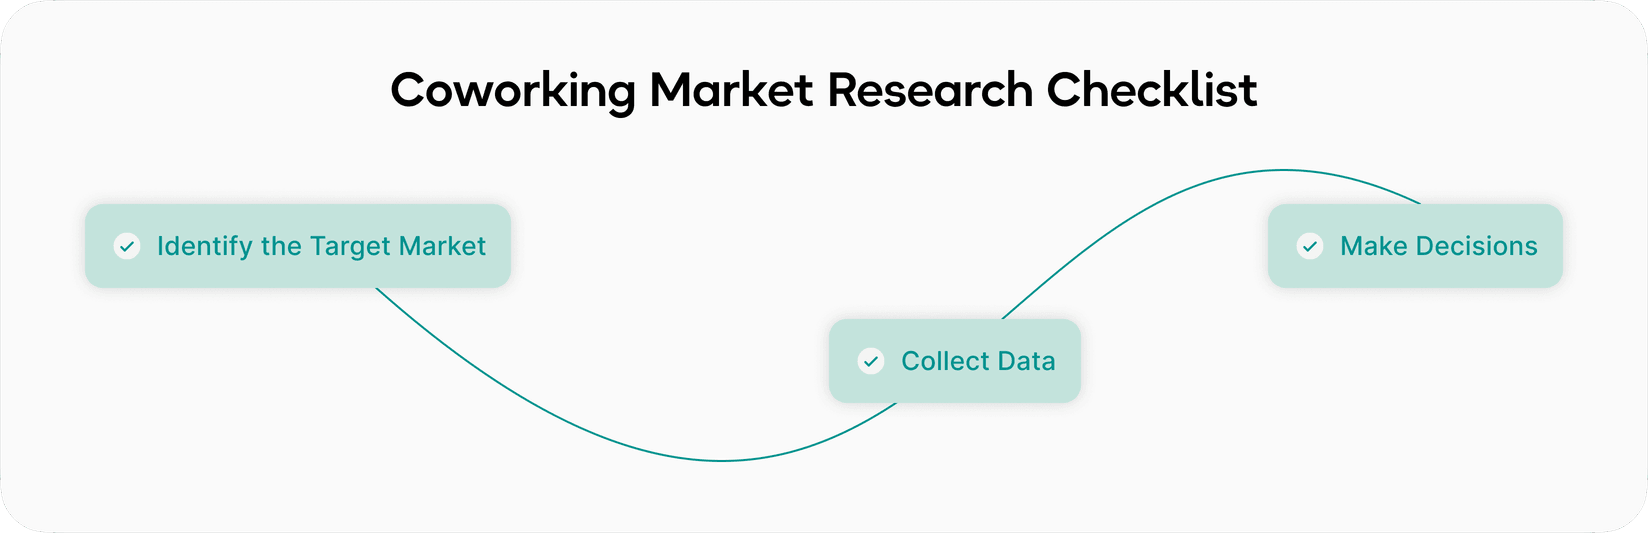 Coworking space market research checklist